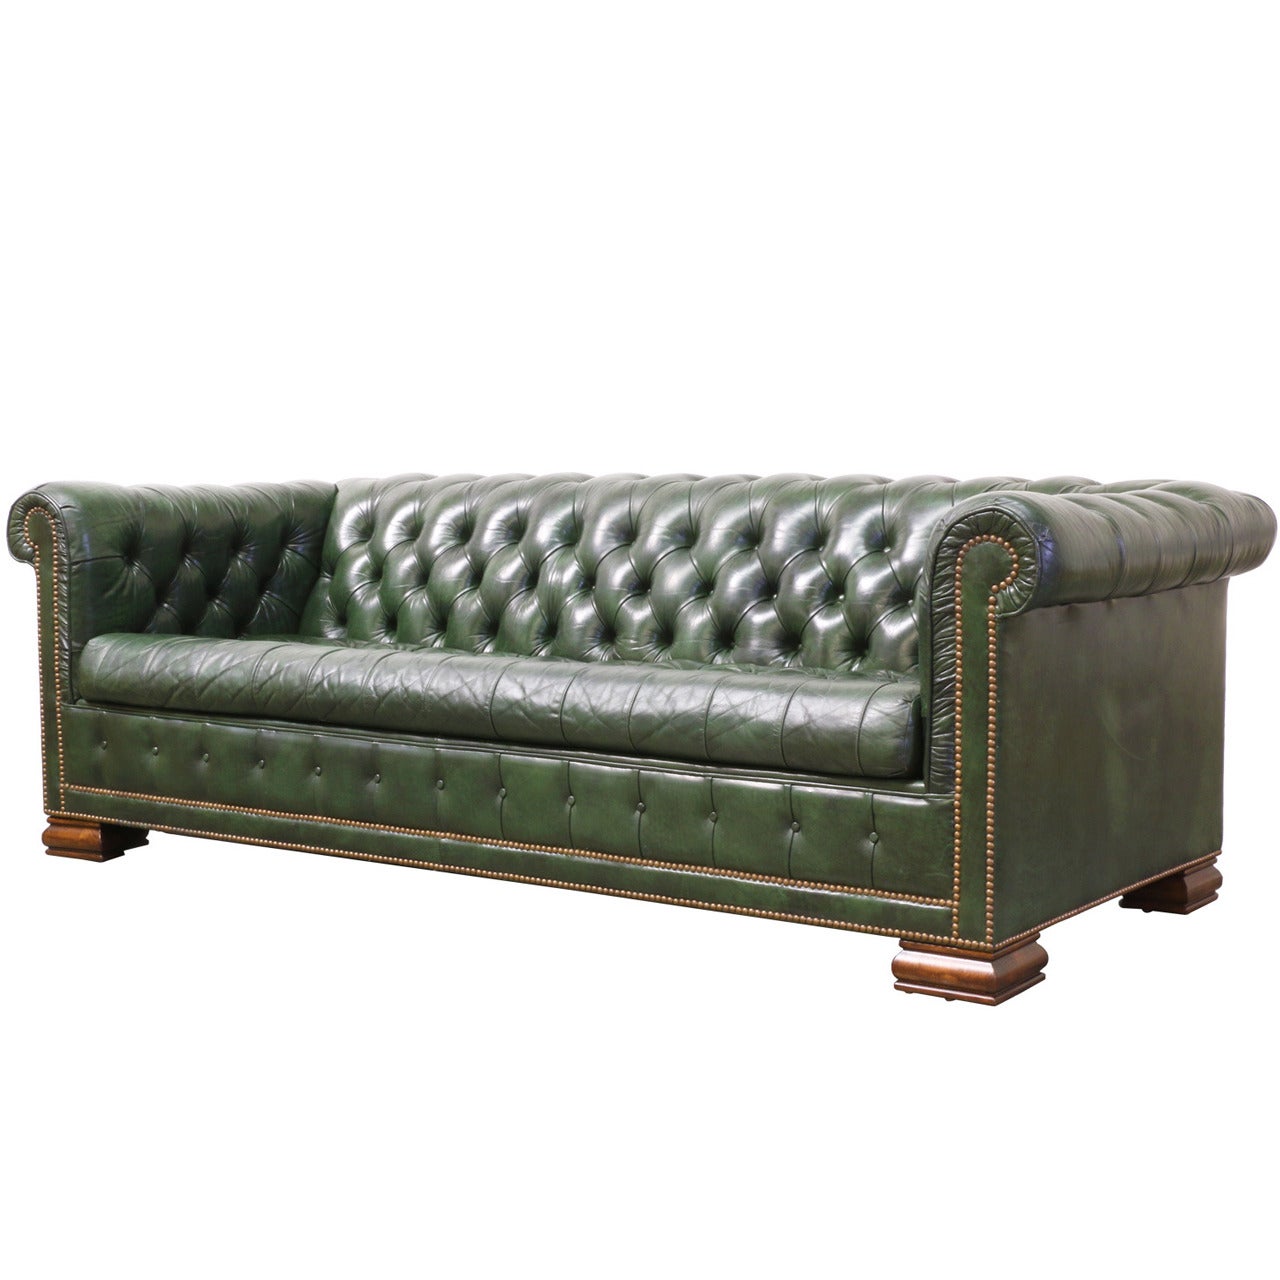 Vintage Green Leather Chesterfield Sofa Bed